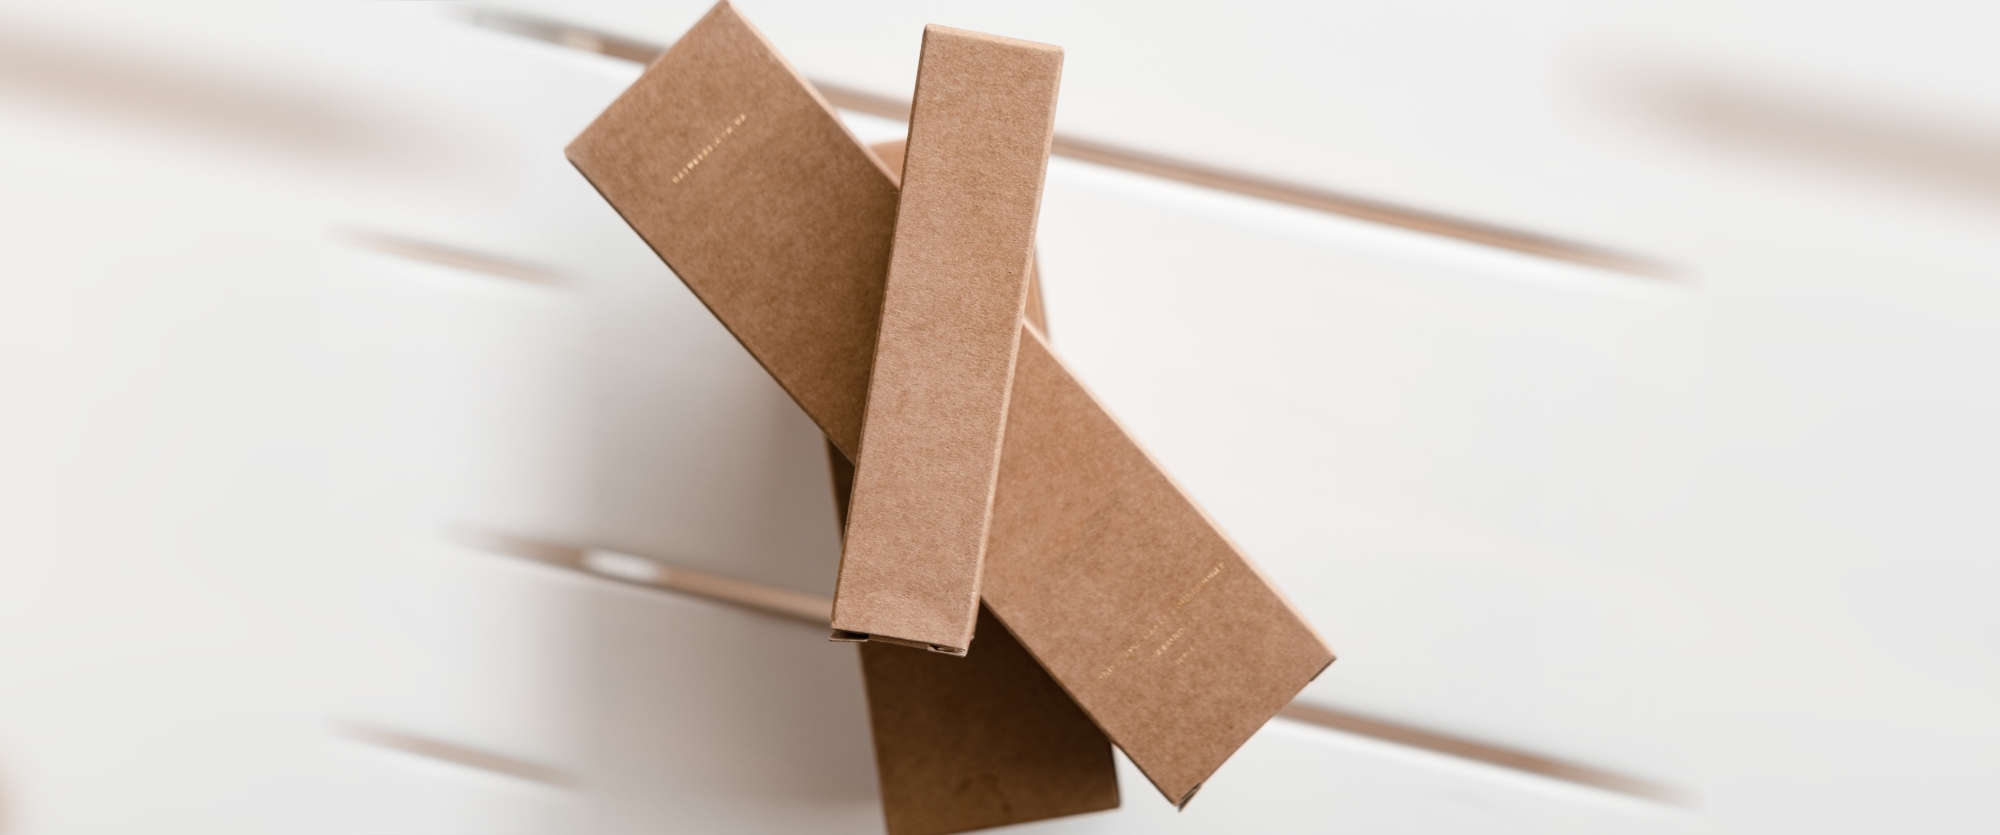 What is Kraft Paper and Why is it a Popular Packaging Choice